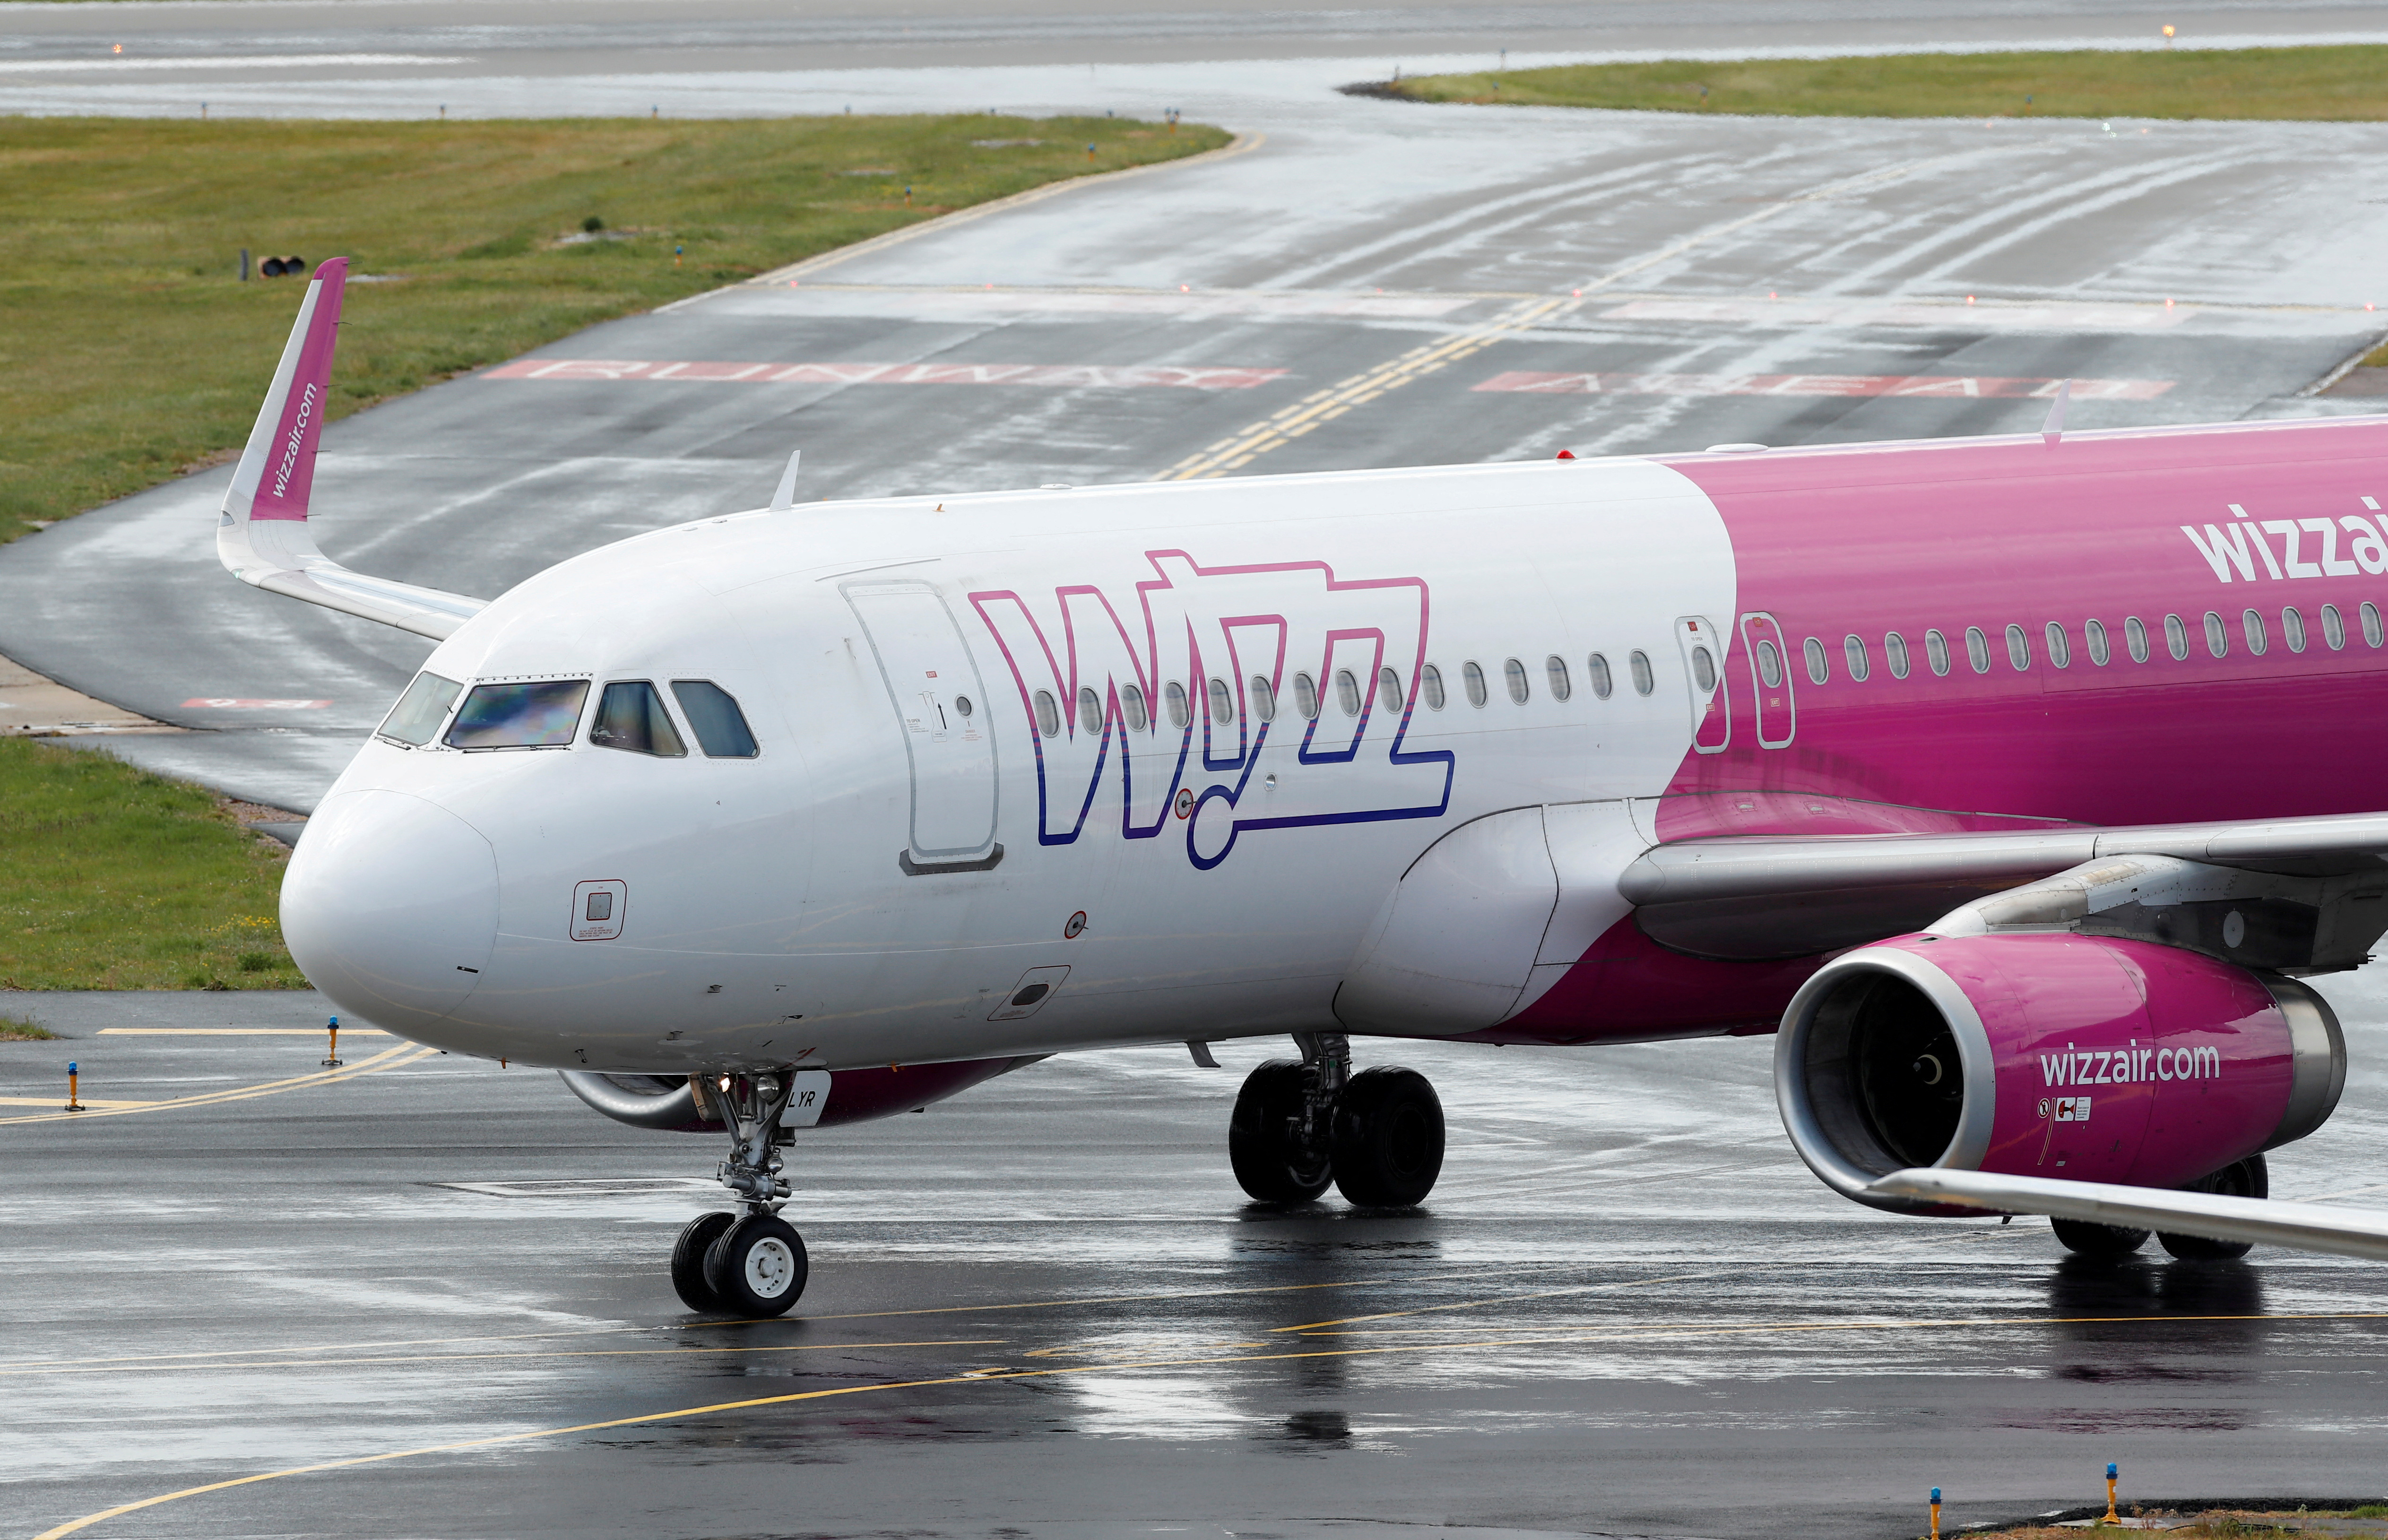 A Wizz Air Airbus A320 from Sofia, Bulgaria taxis to a gate